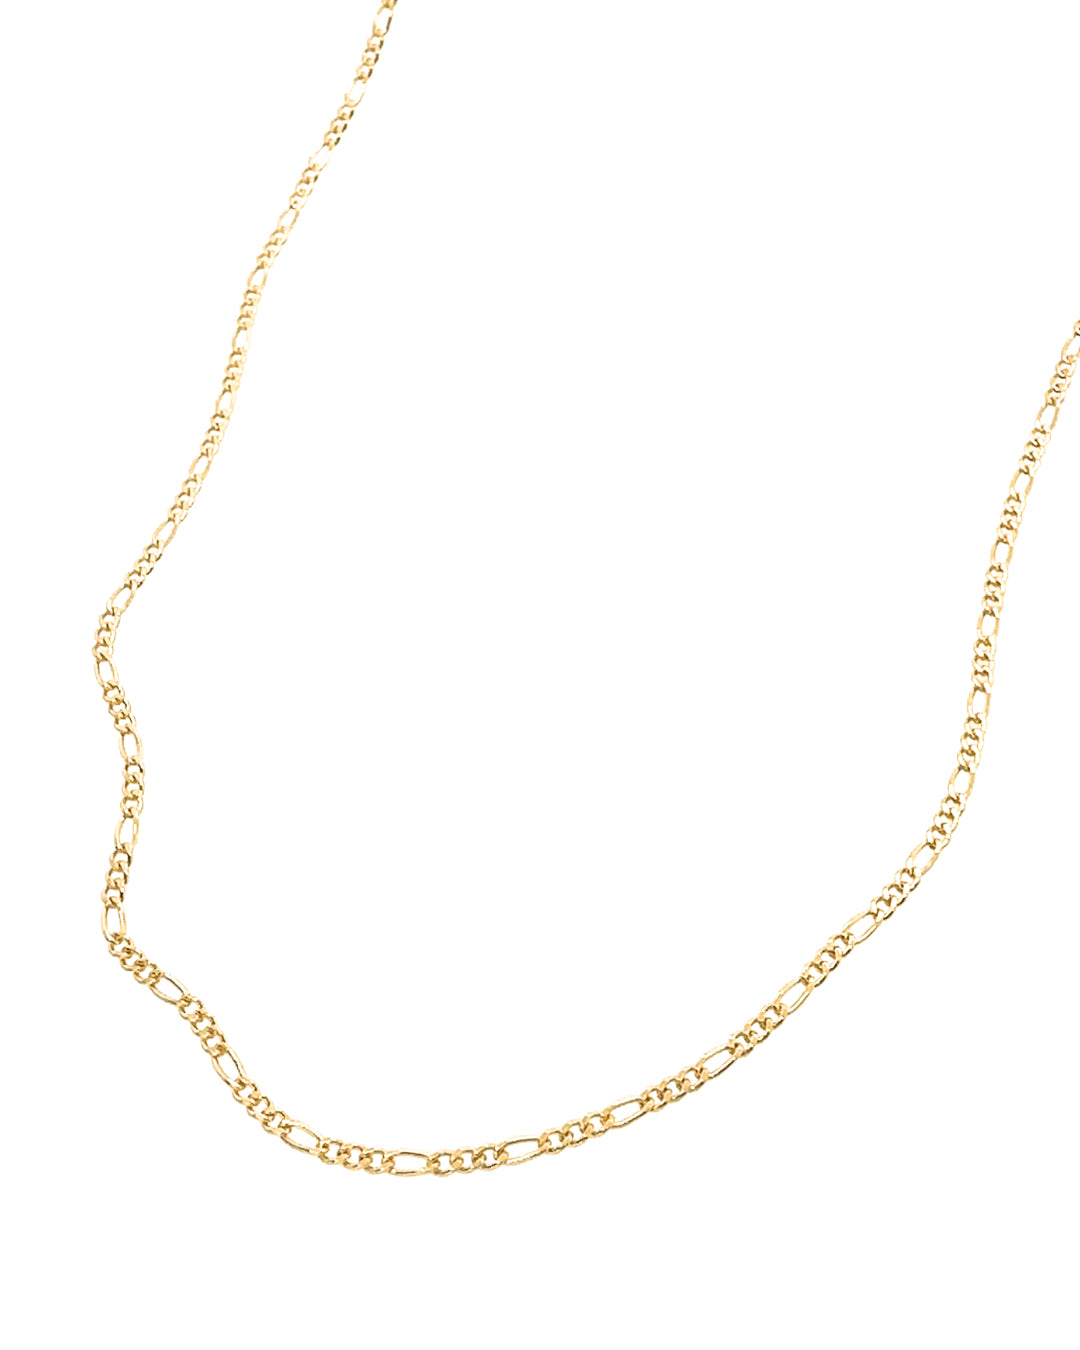 14k yellow gold fill fine Figaro chain necklace 